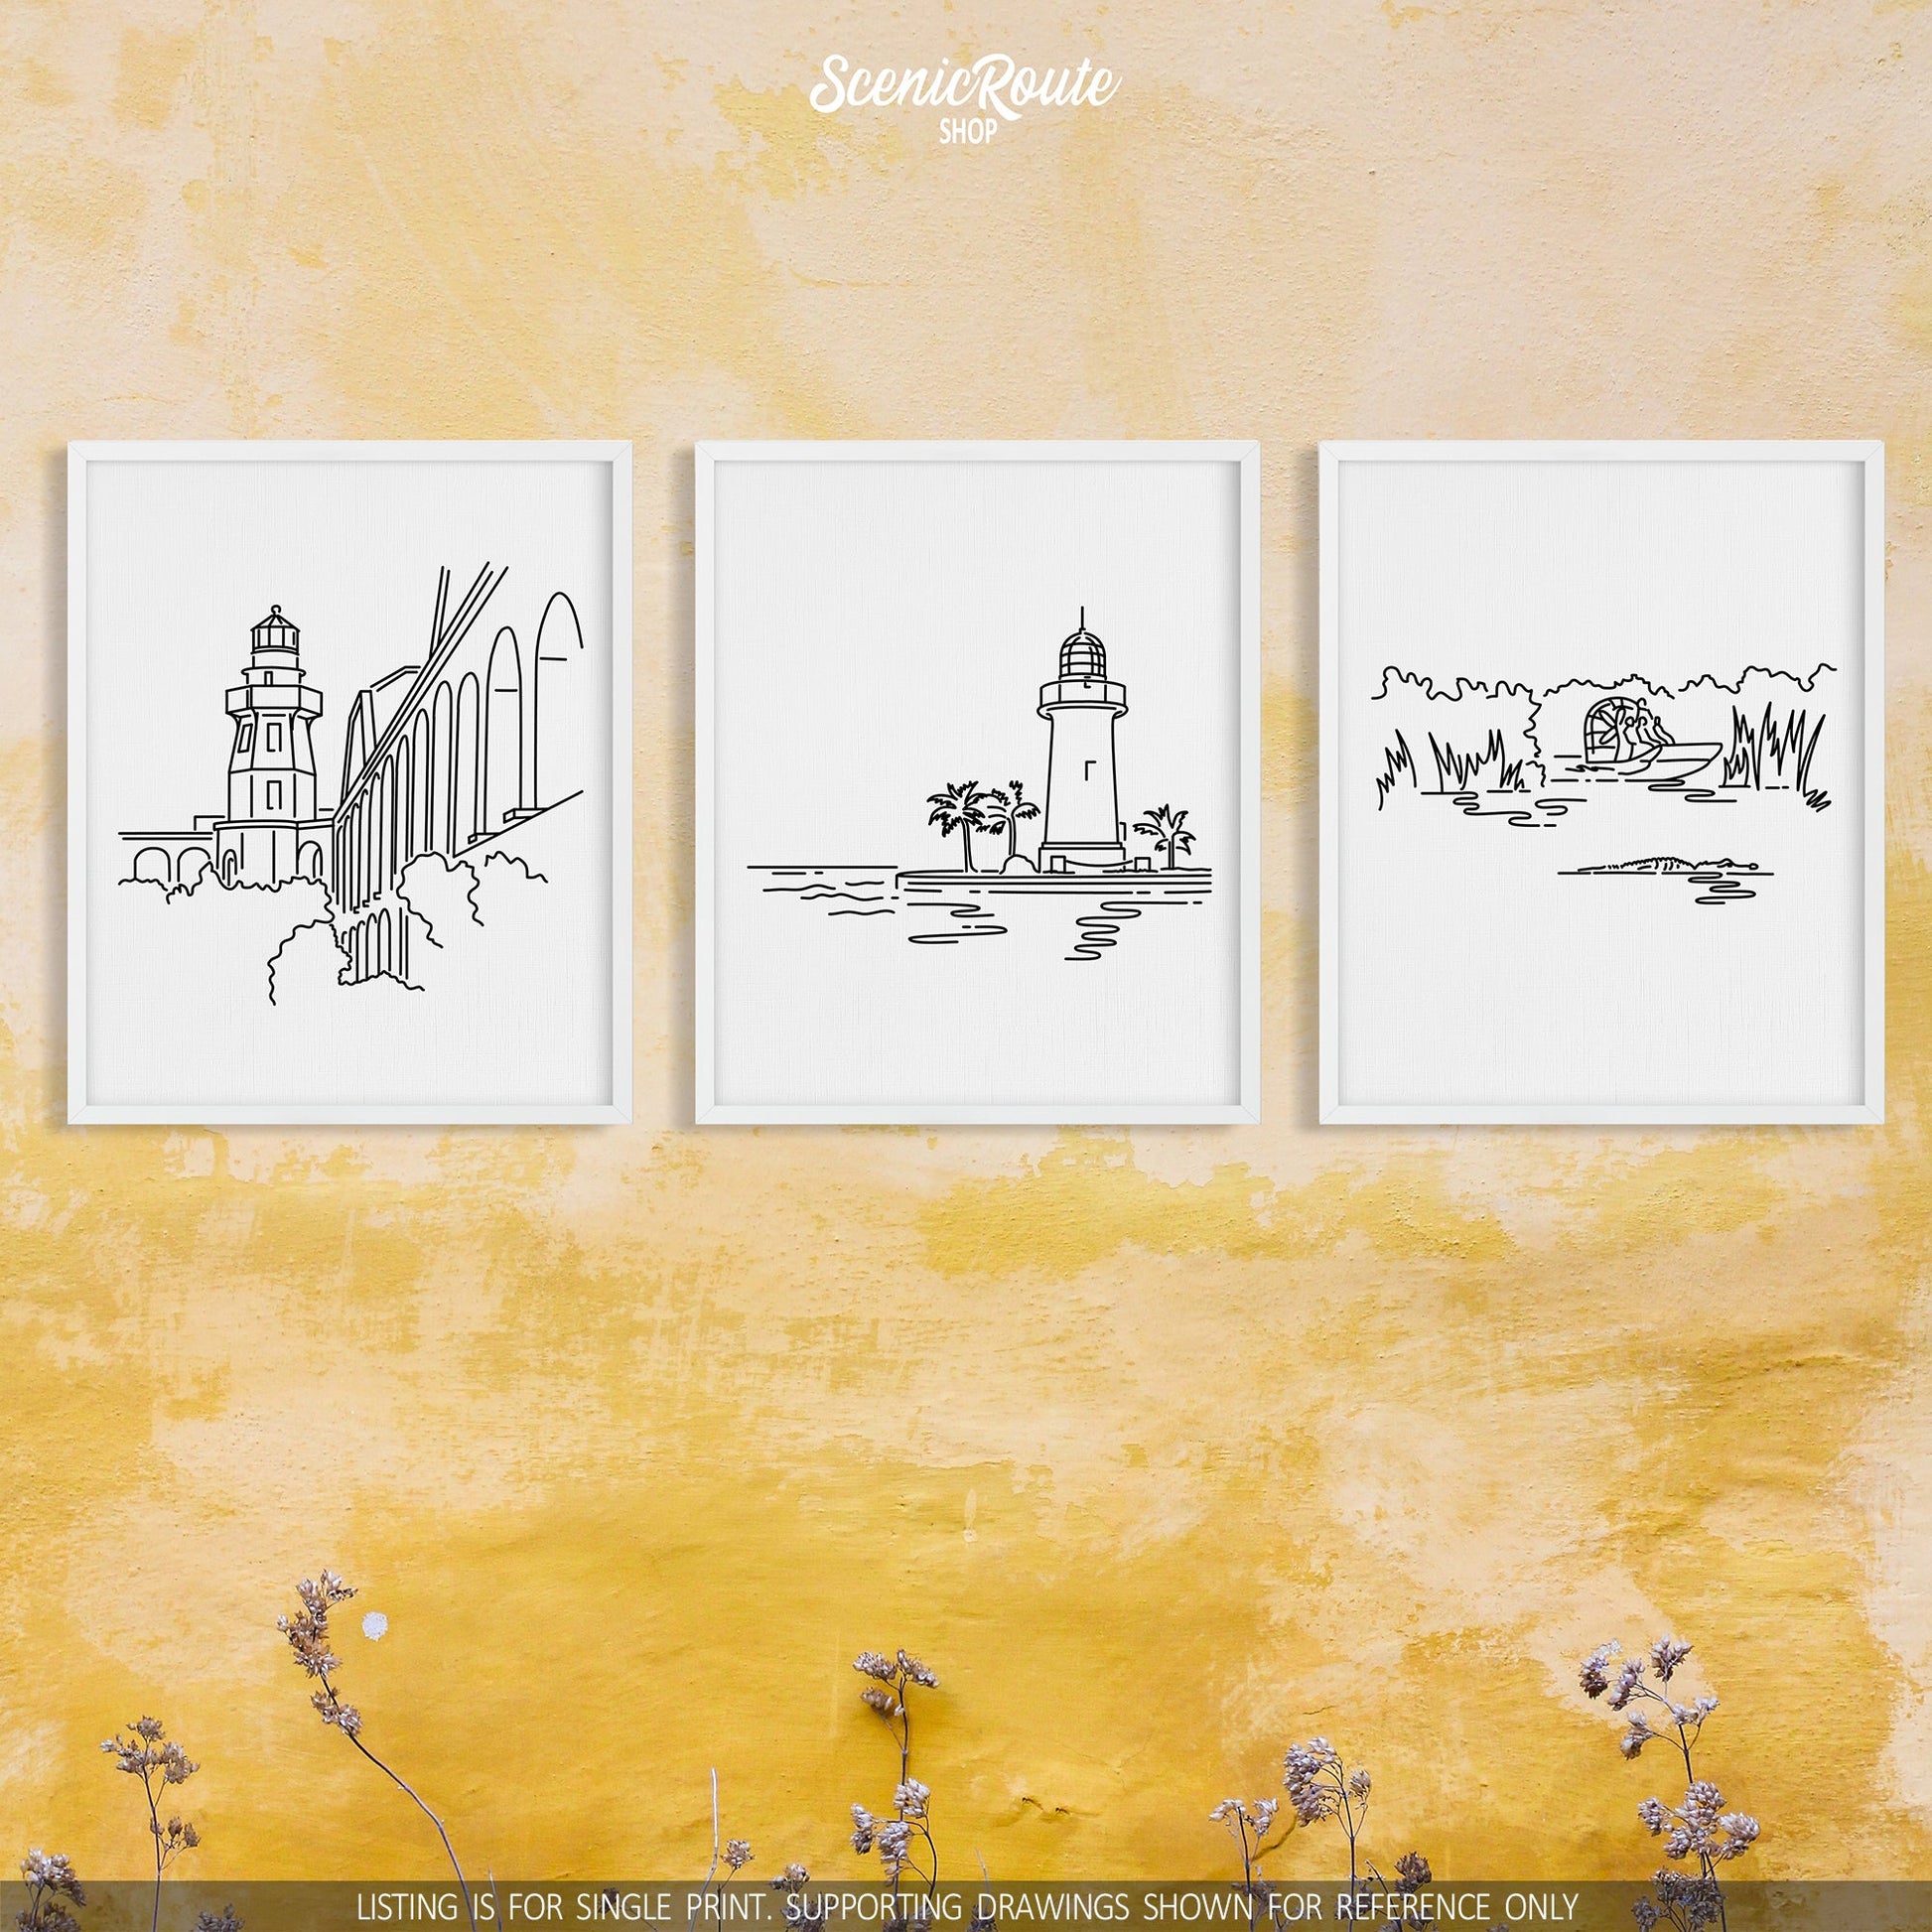 A group of three framed drawings on a yellow wall. The line art drawings include Dry Tortugas National Park, Biscayne National Park, and Everglades National Park